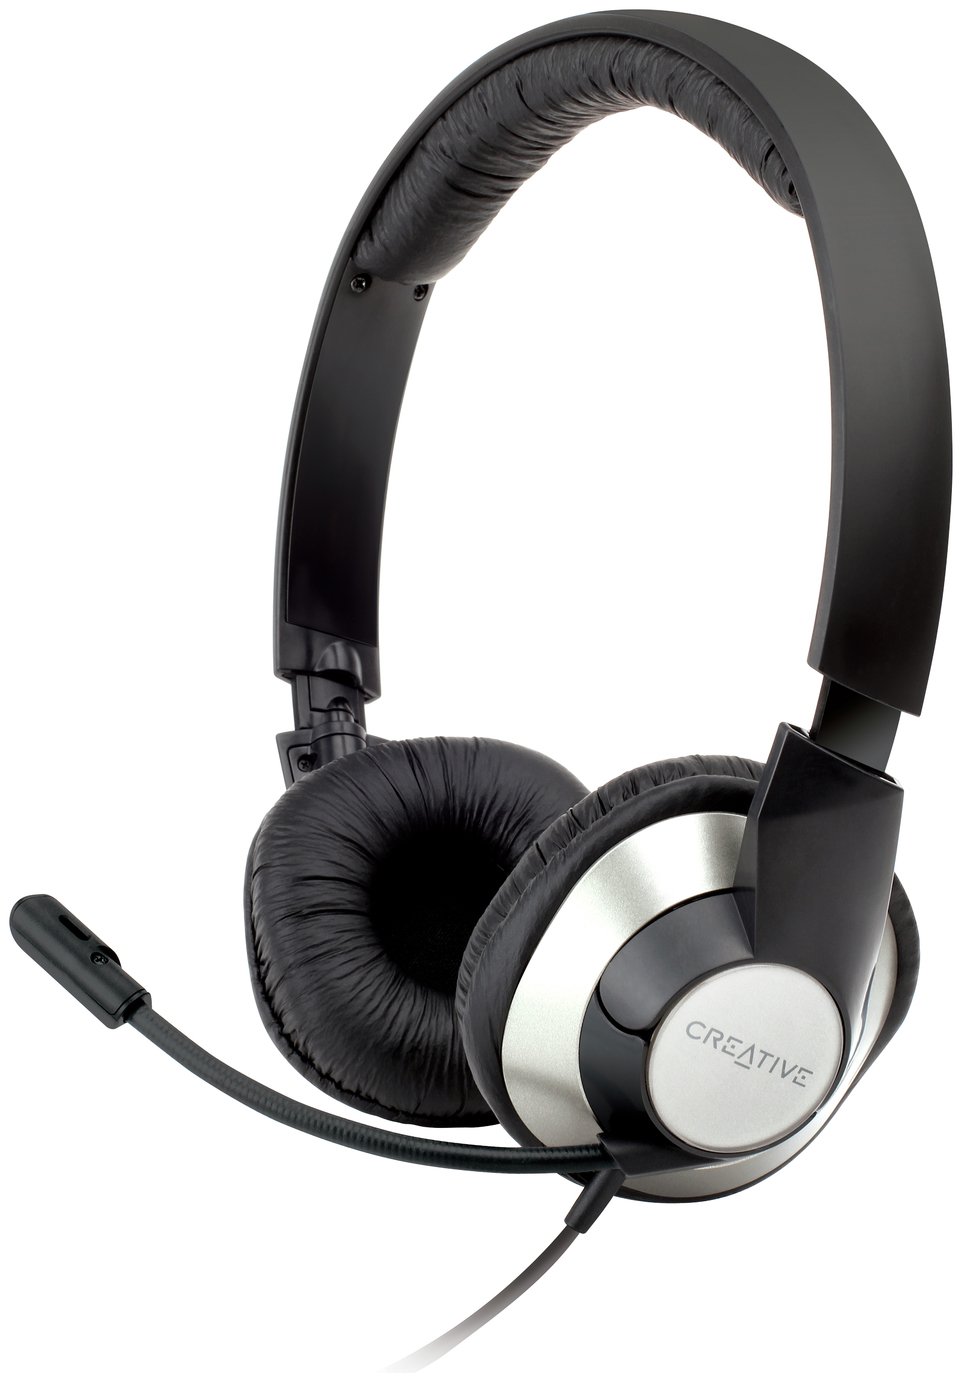 Creative Chatmax HS-720 Laptop and PC USB Headset